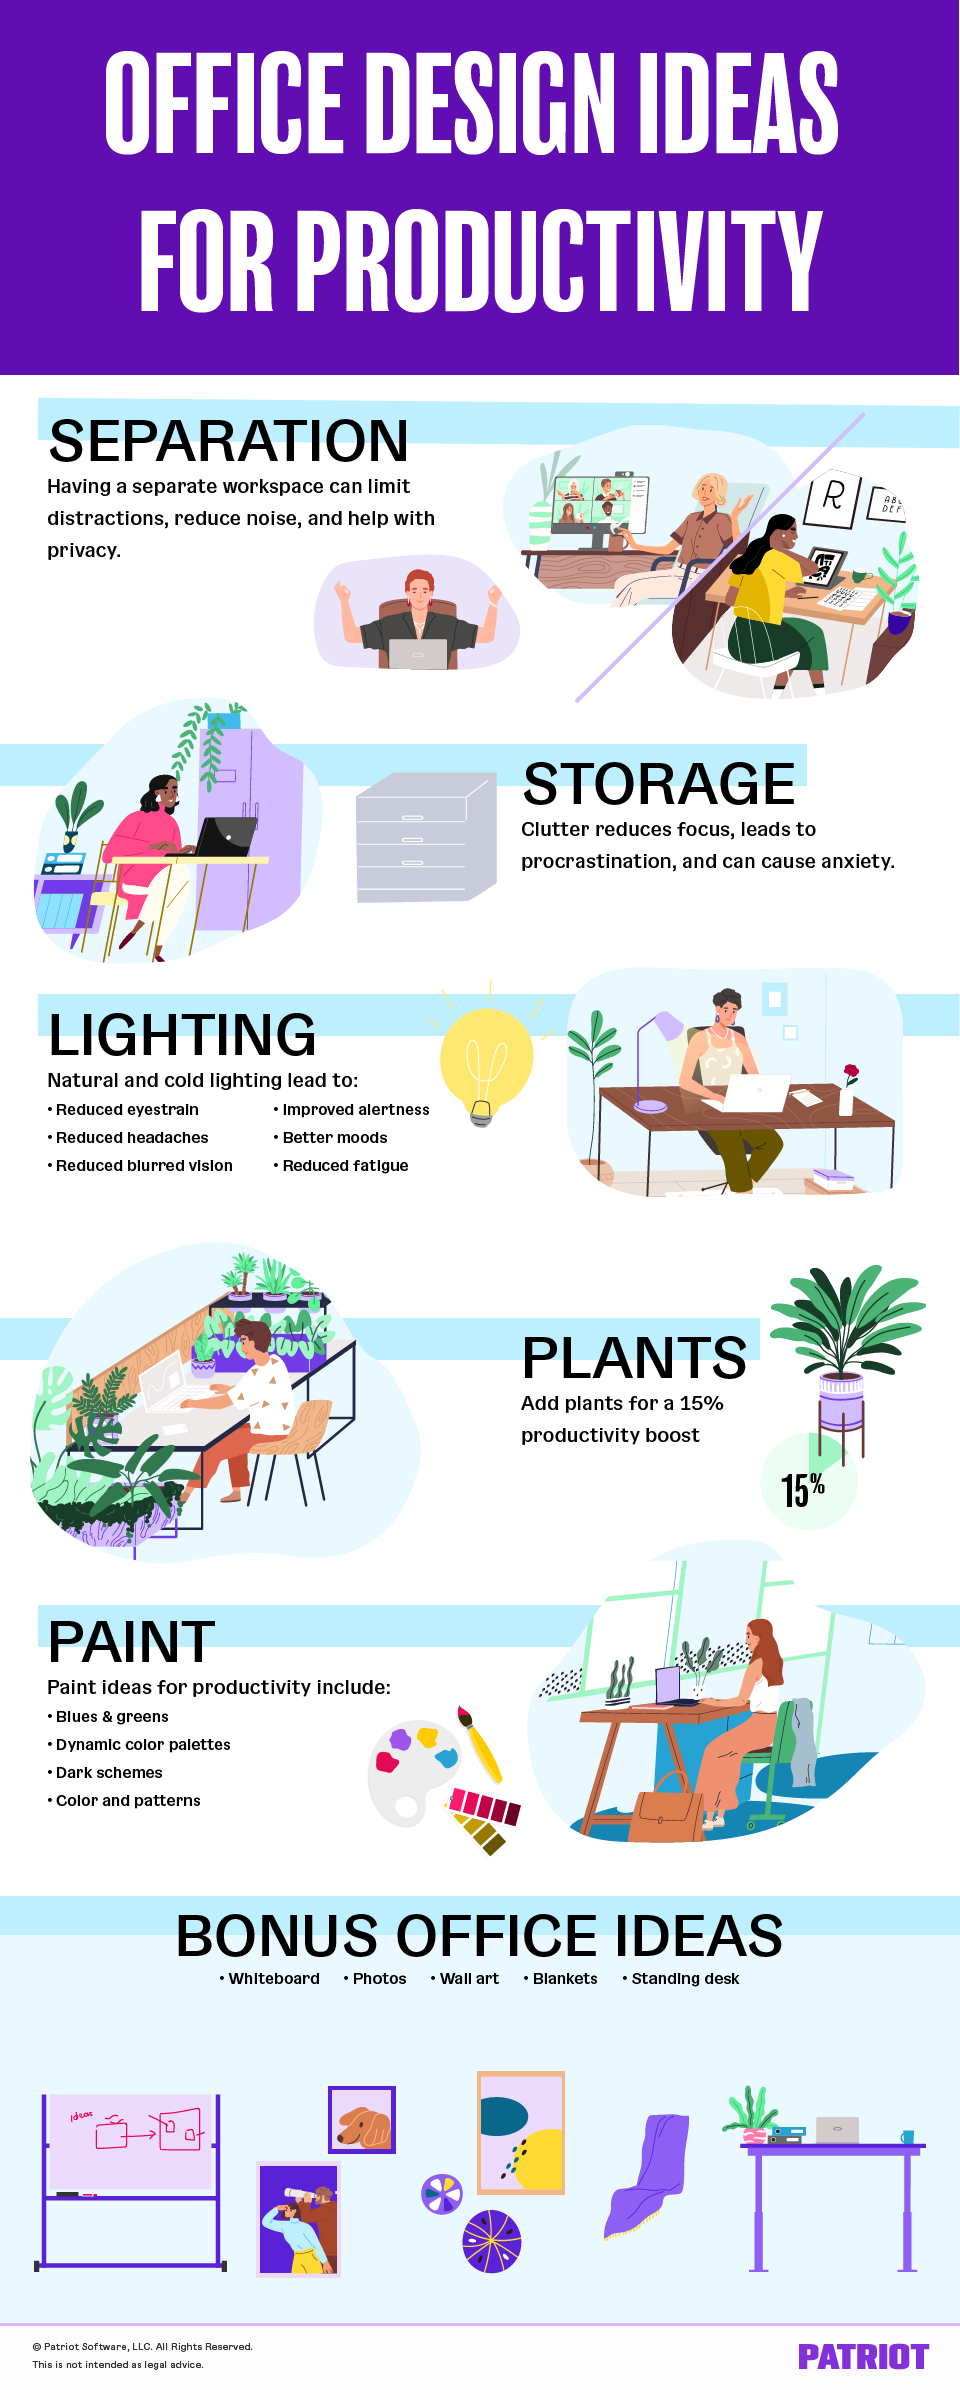 6 office design ideas for productivity infographic